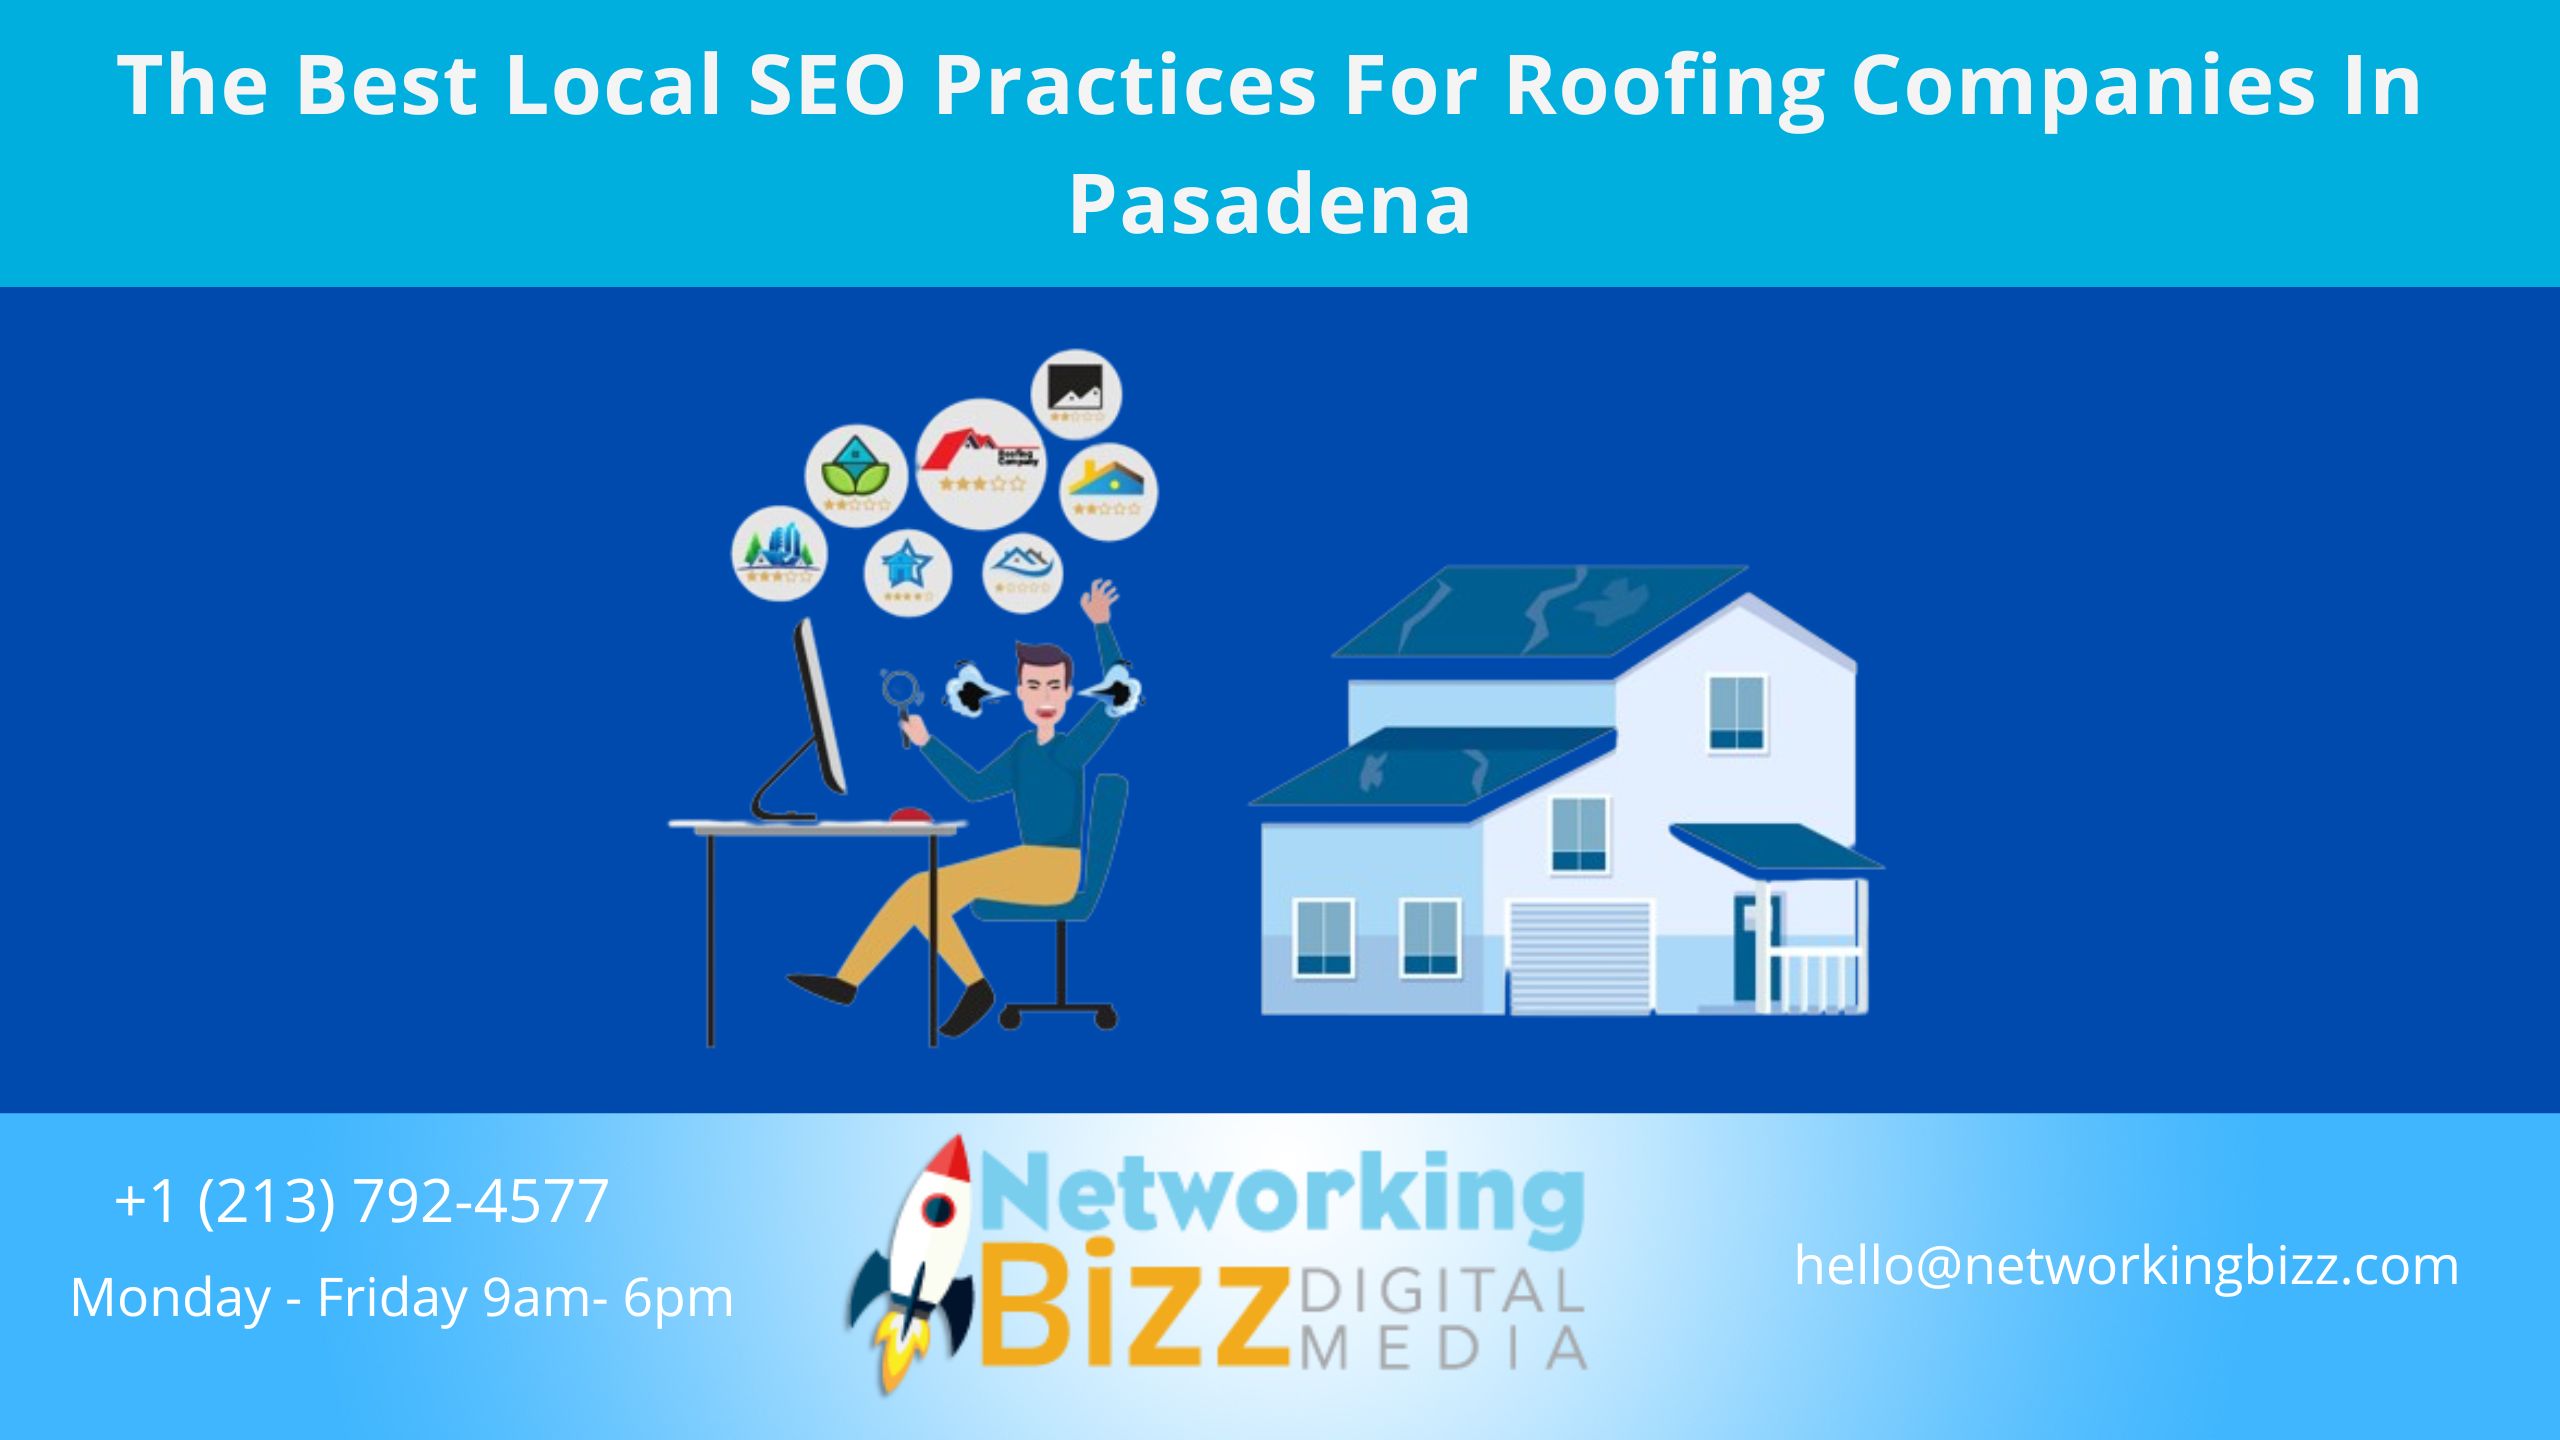 The Best Local SEO Practices For Roofing Companies In Pasadena